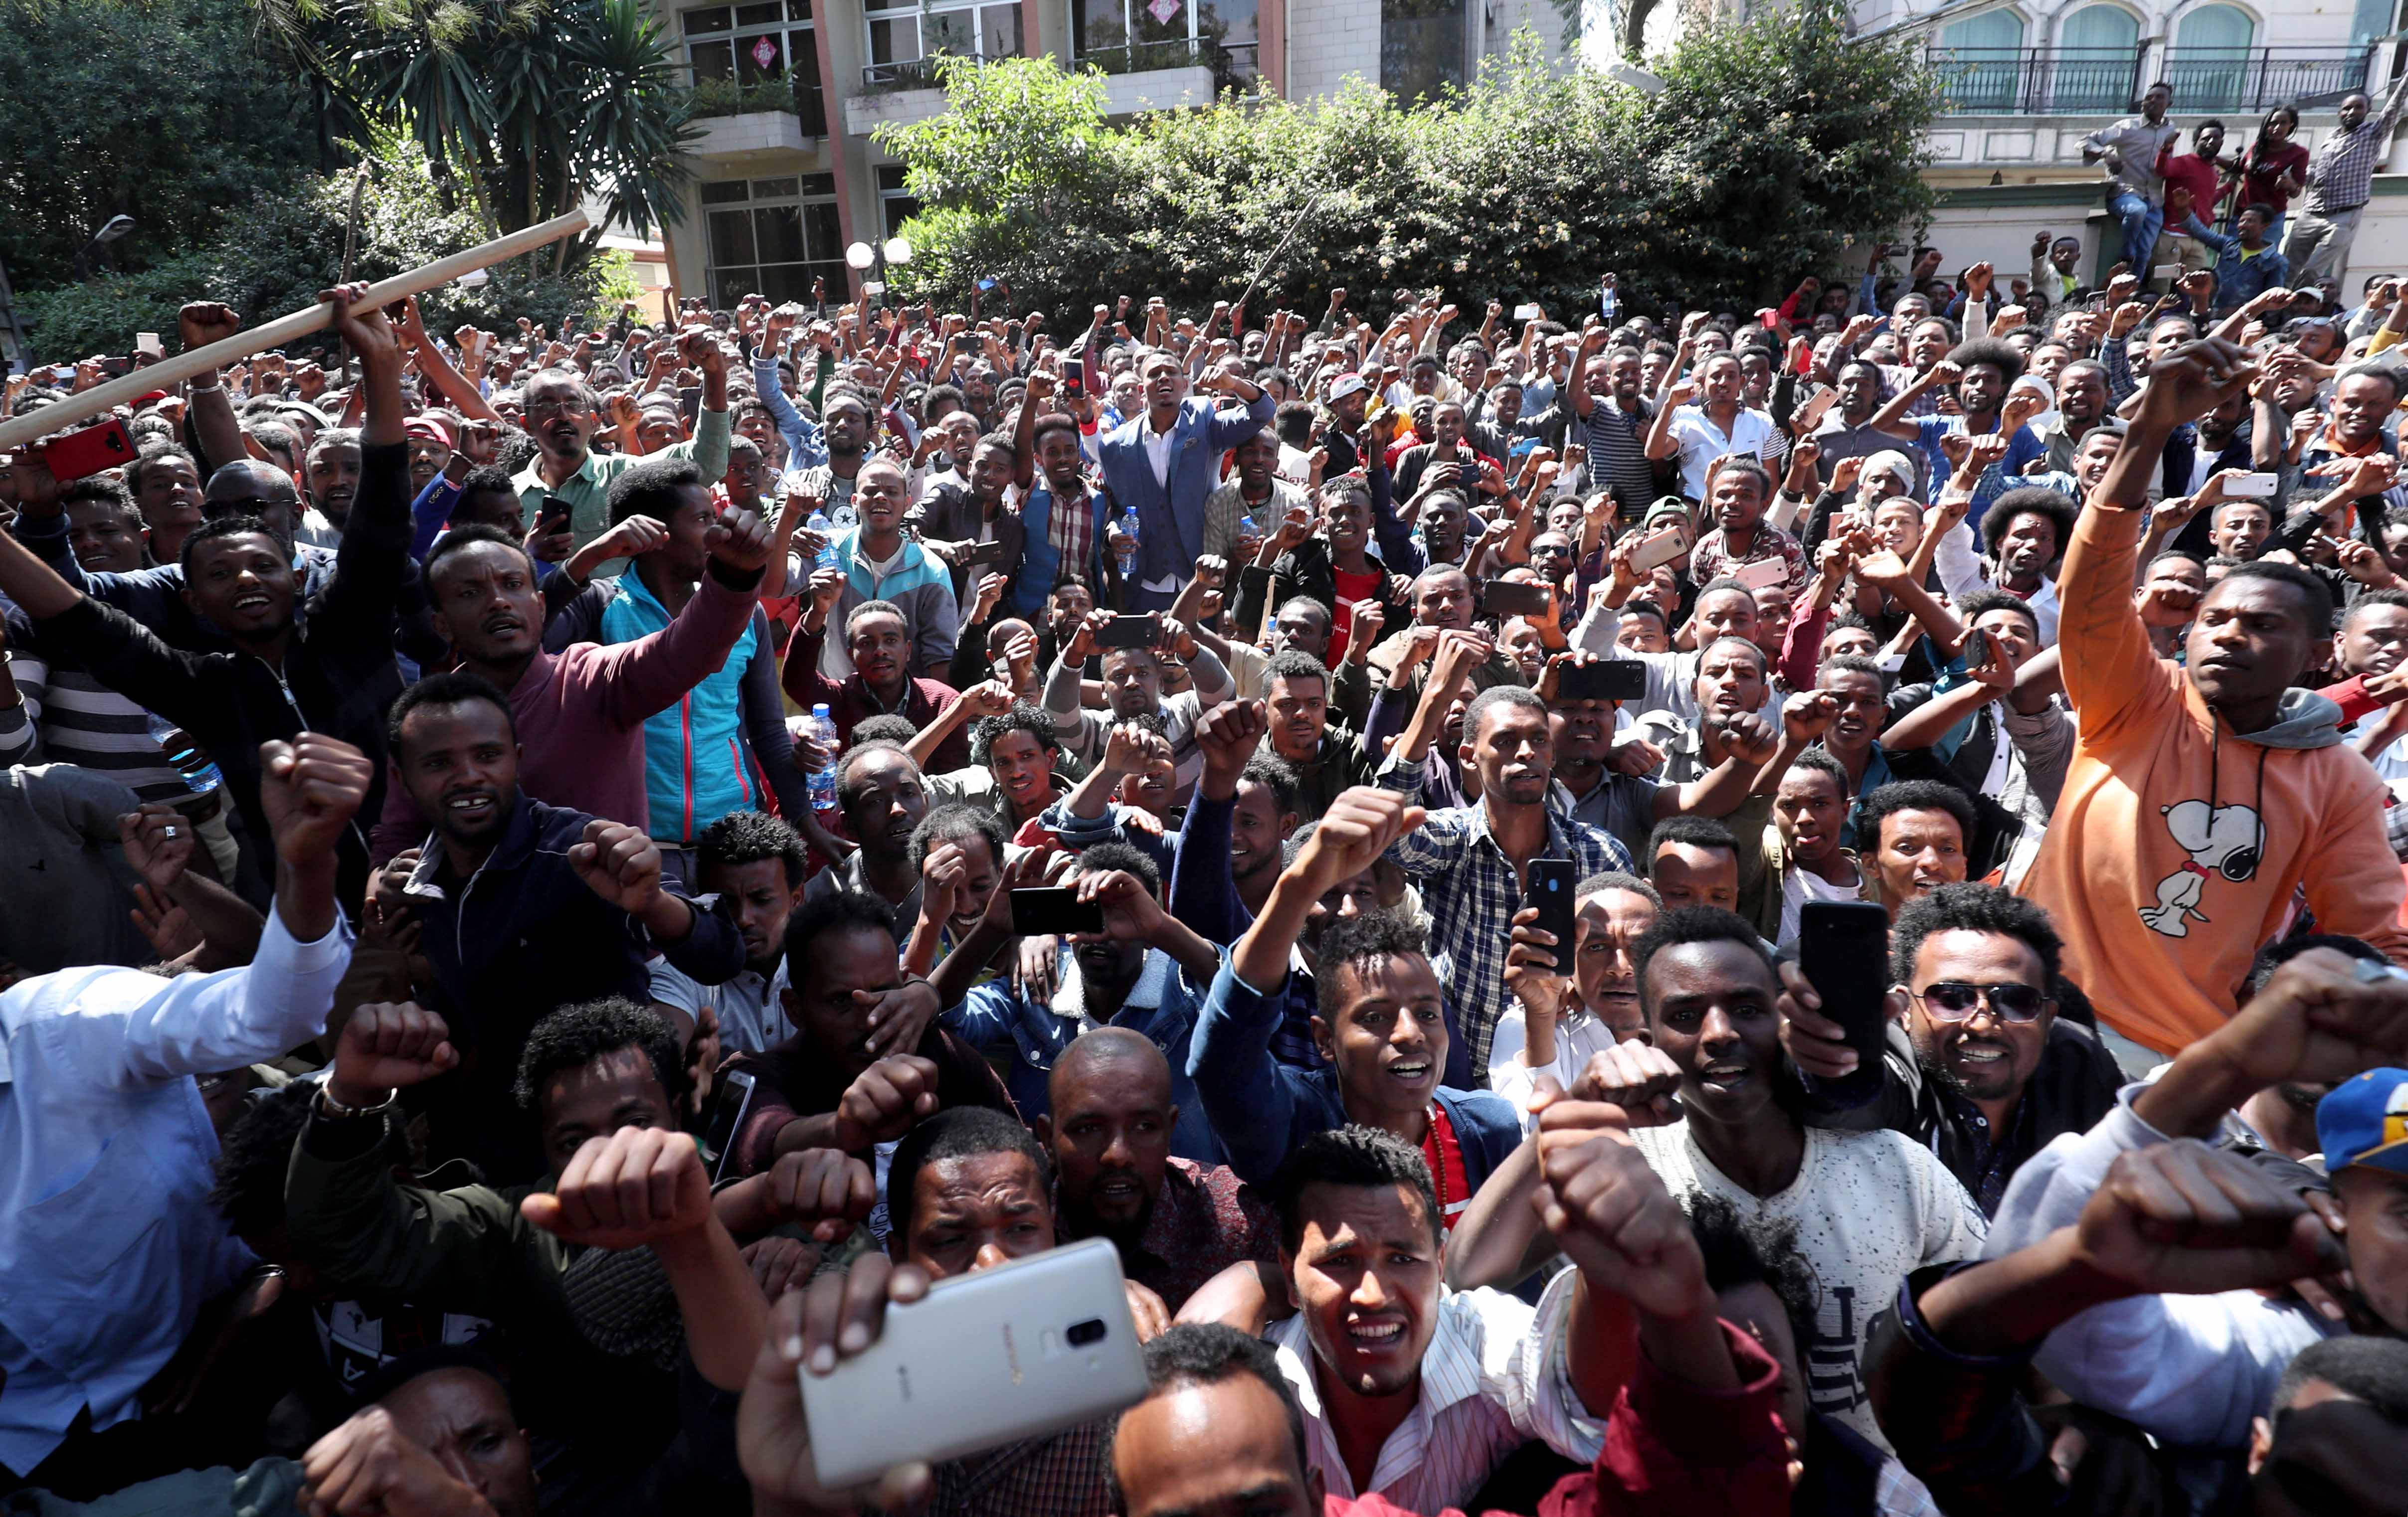 Oromo youth ​in Addis Ababa, Ethiopia gather outside the house of Jawar Mohammed, an Oromo activist, and influential figure during the 2015-2018 protests in the country. October 23, 2019. (c) 2019 REUTERS/Tiksa Negeri​